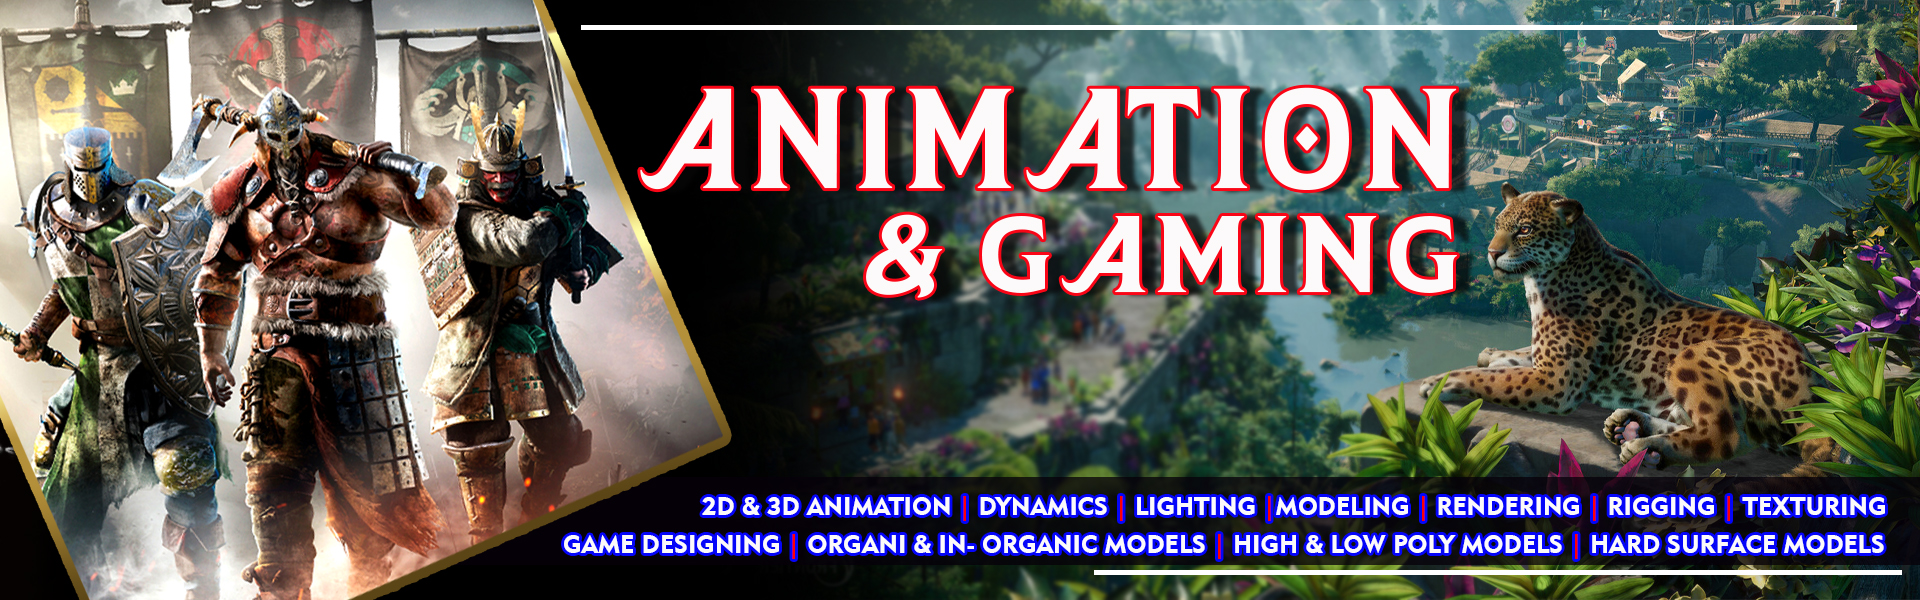 100% Placement Guarantee on Agreement | Vfx and Animation Courses